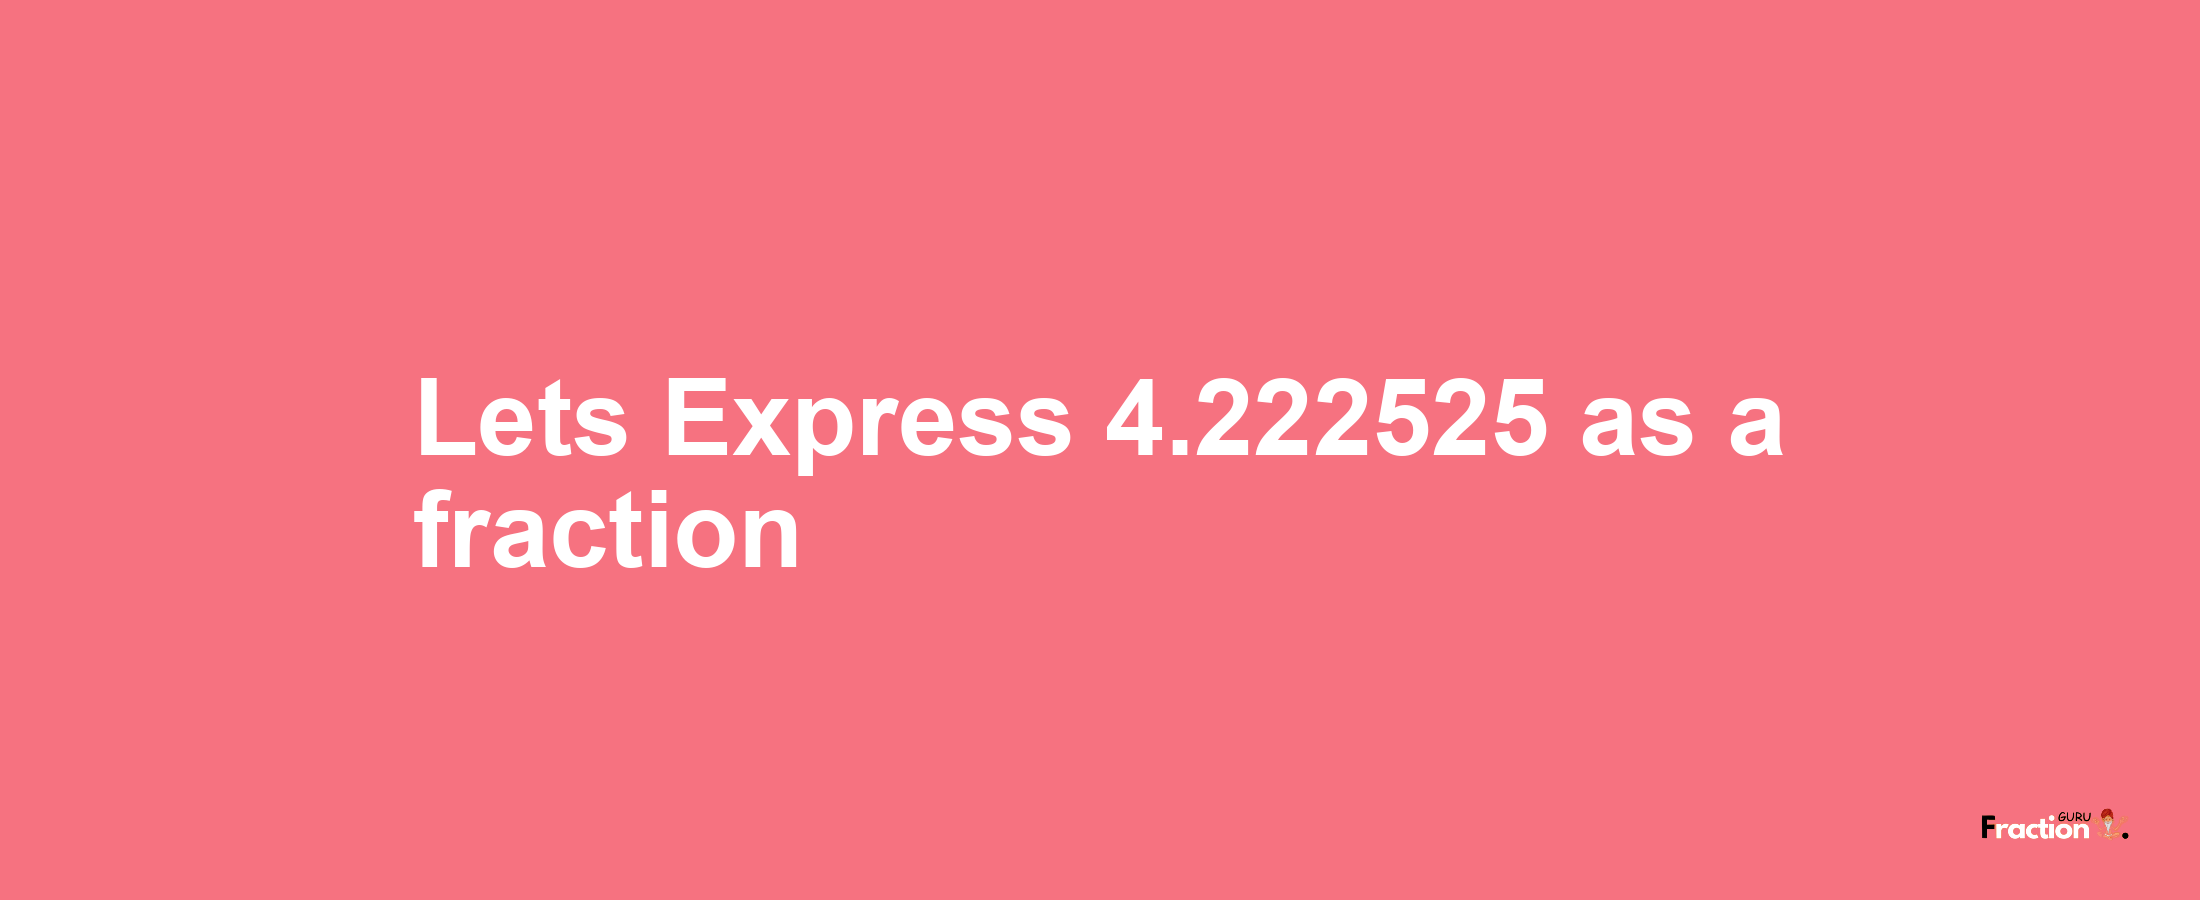 Lets Express 4.222525 as afraction